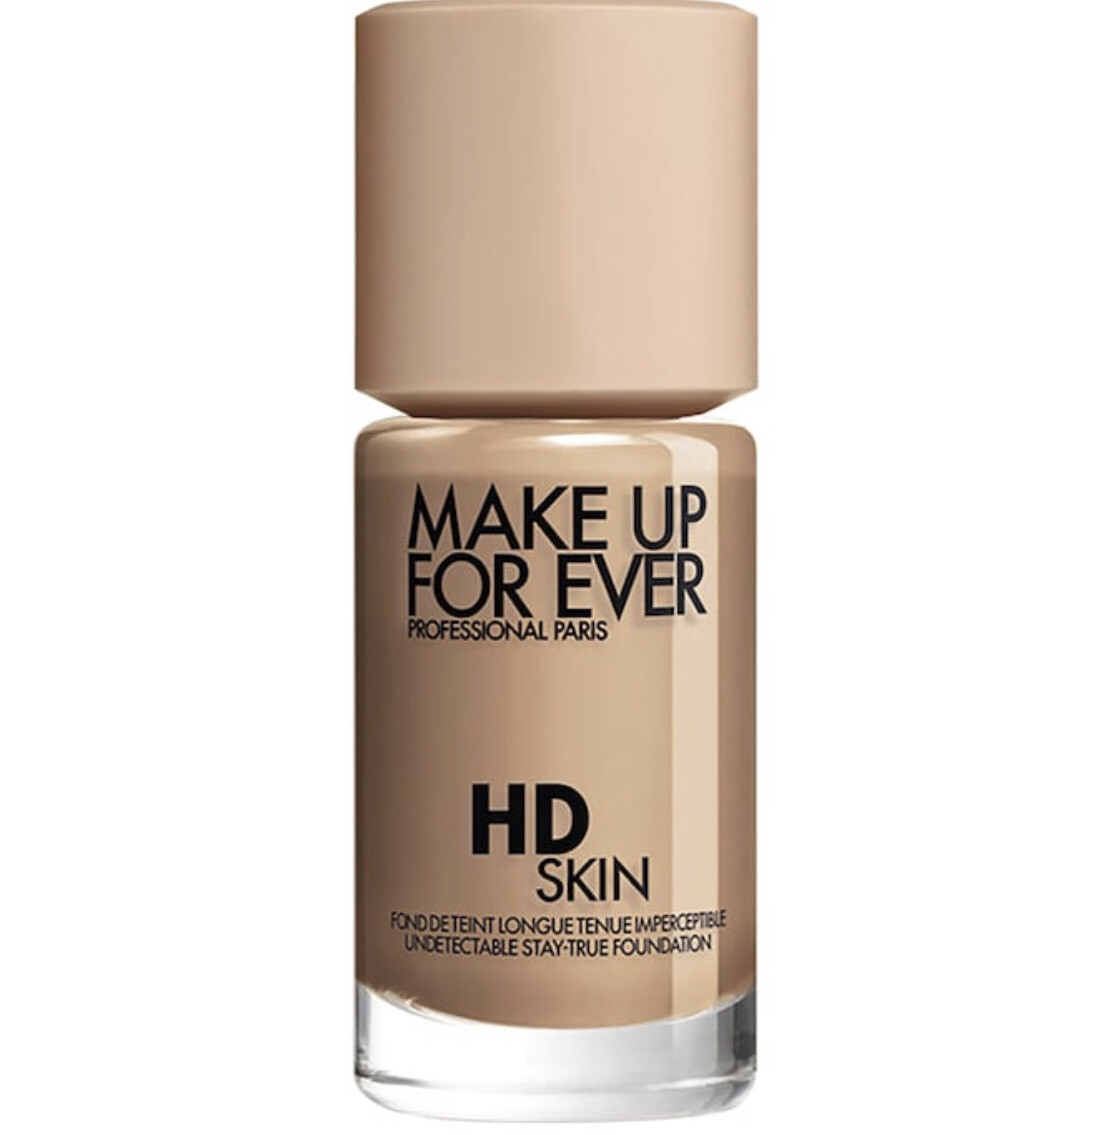 Make Up For Ever - HD Skin Undetectable Longwear Foundation | 2N34 Honey - for medium to Tan skin tones with neutral undertones